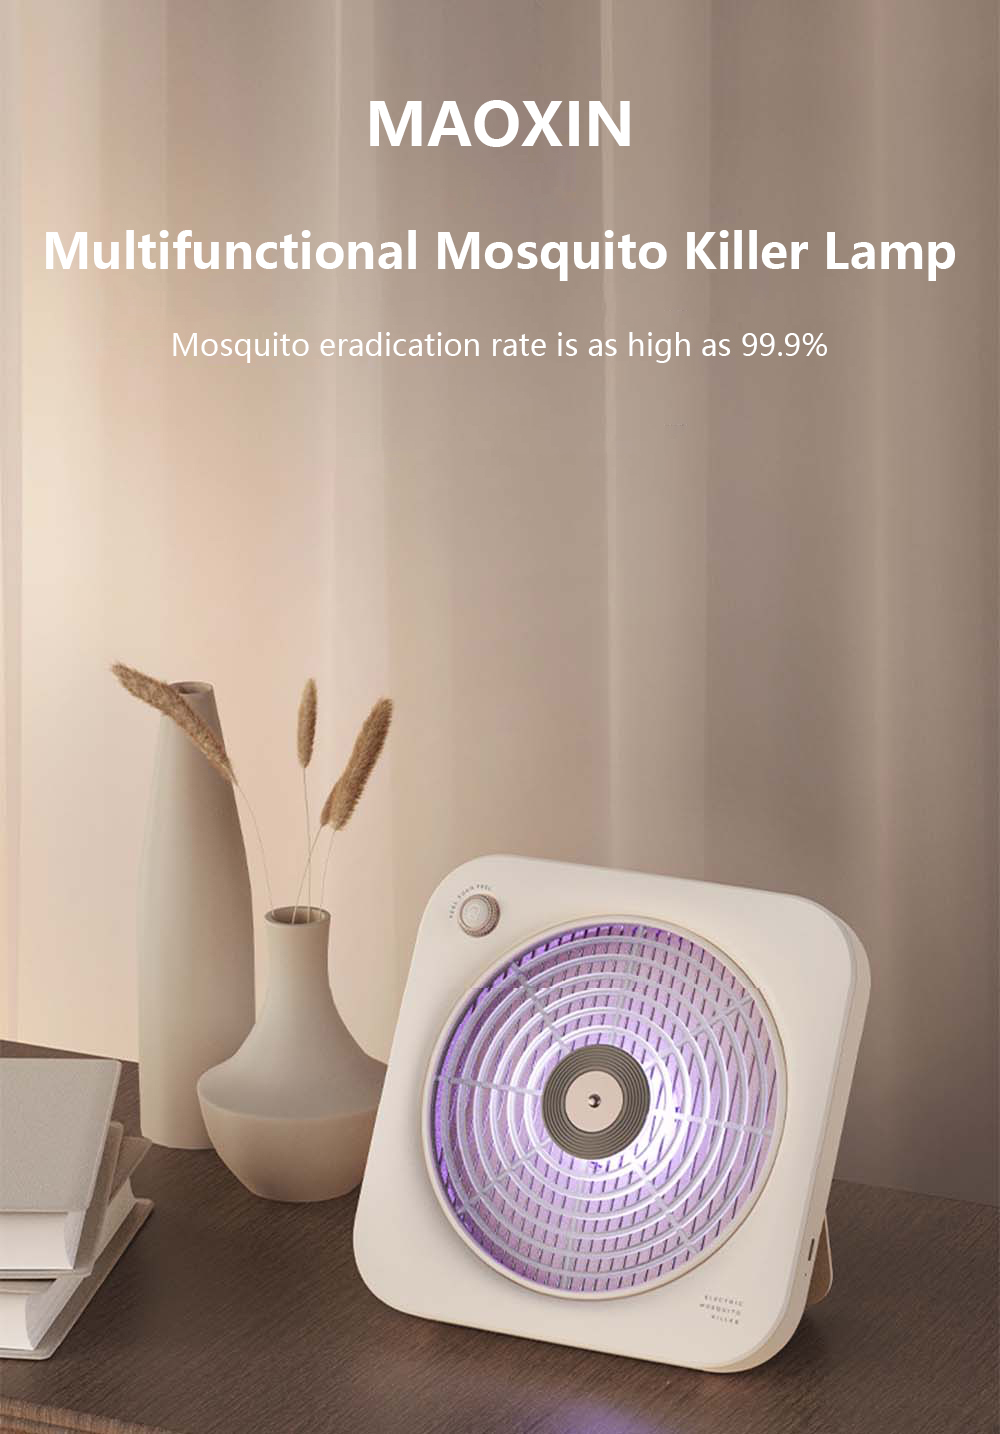 MAOXIN-Multifunctional-Mosquito-Killer-Lamp-Desktop-VerticalWall-Mount-Mosquito-Lamp-With-Small-Nigh-1953884-1